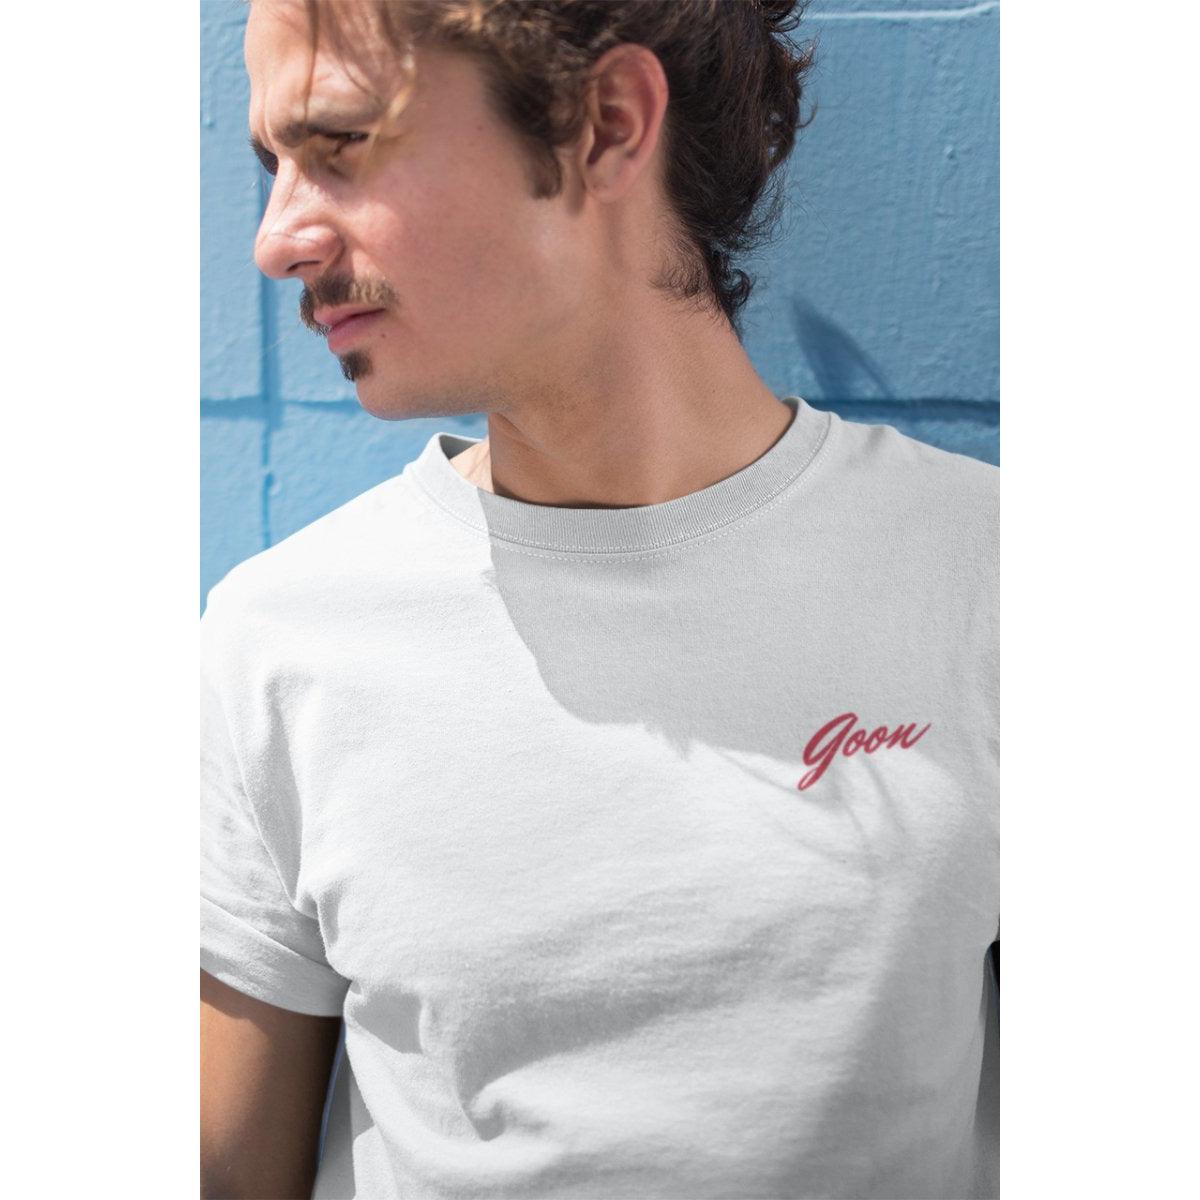 Goon Embroidered Mens Tee